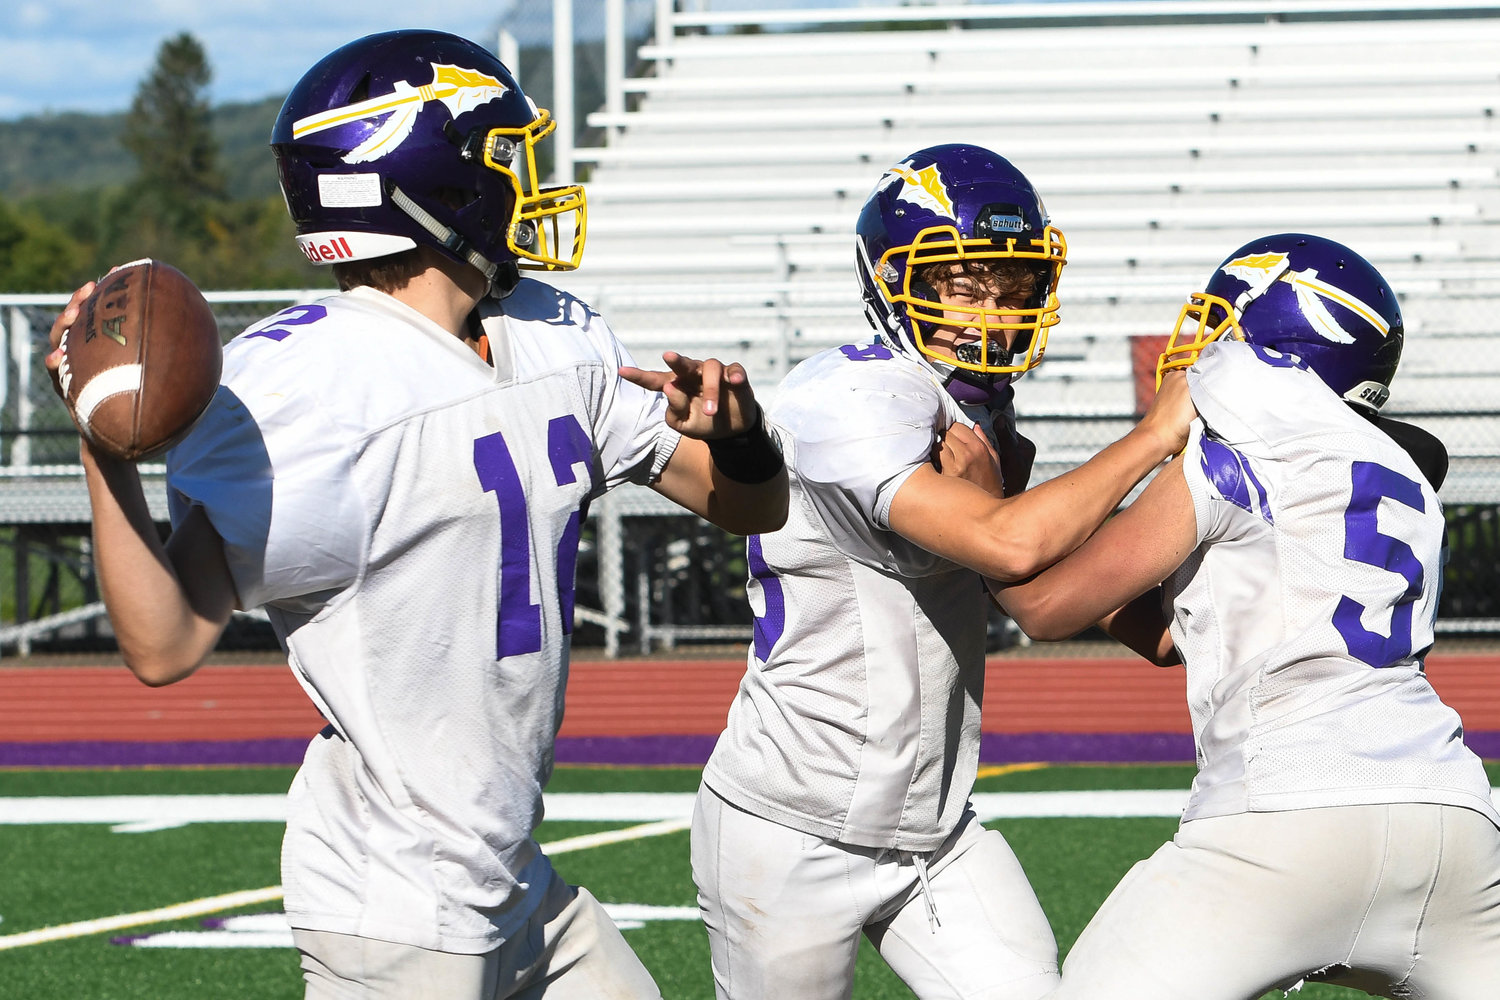 Waterville player Tyler Evans, center, rushes quarterback Kane Patterson during practice. The Class D team opens the season against visiting Mount Markham.